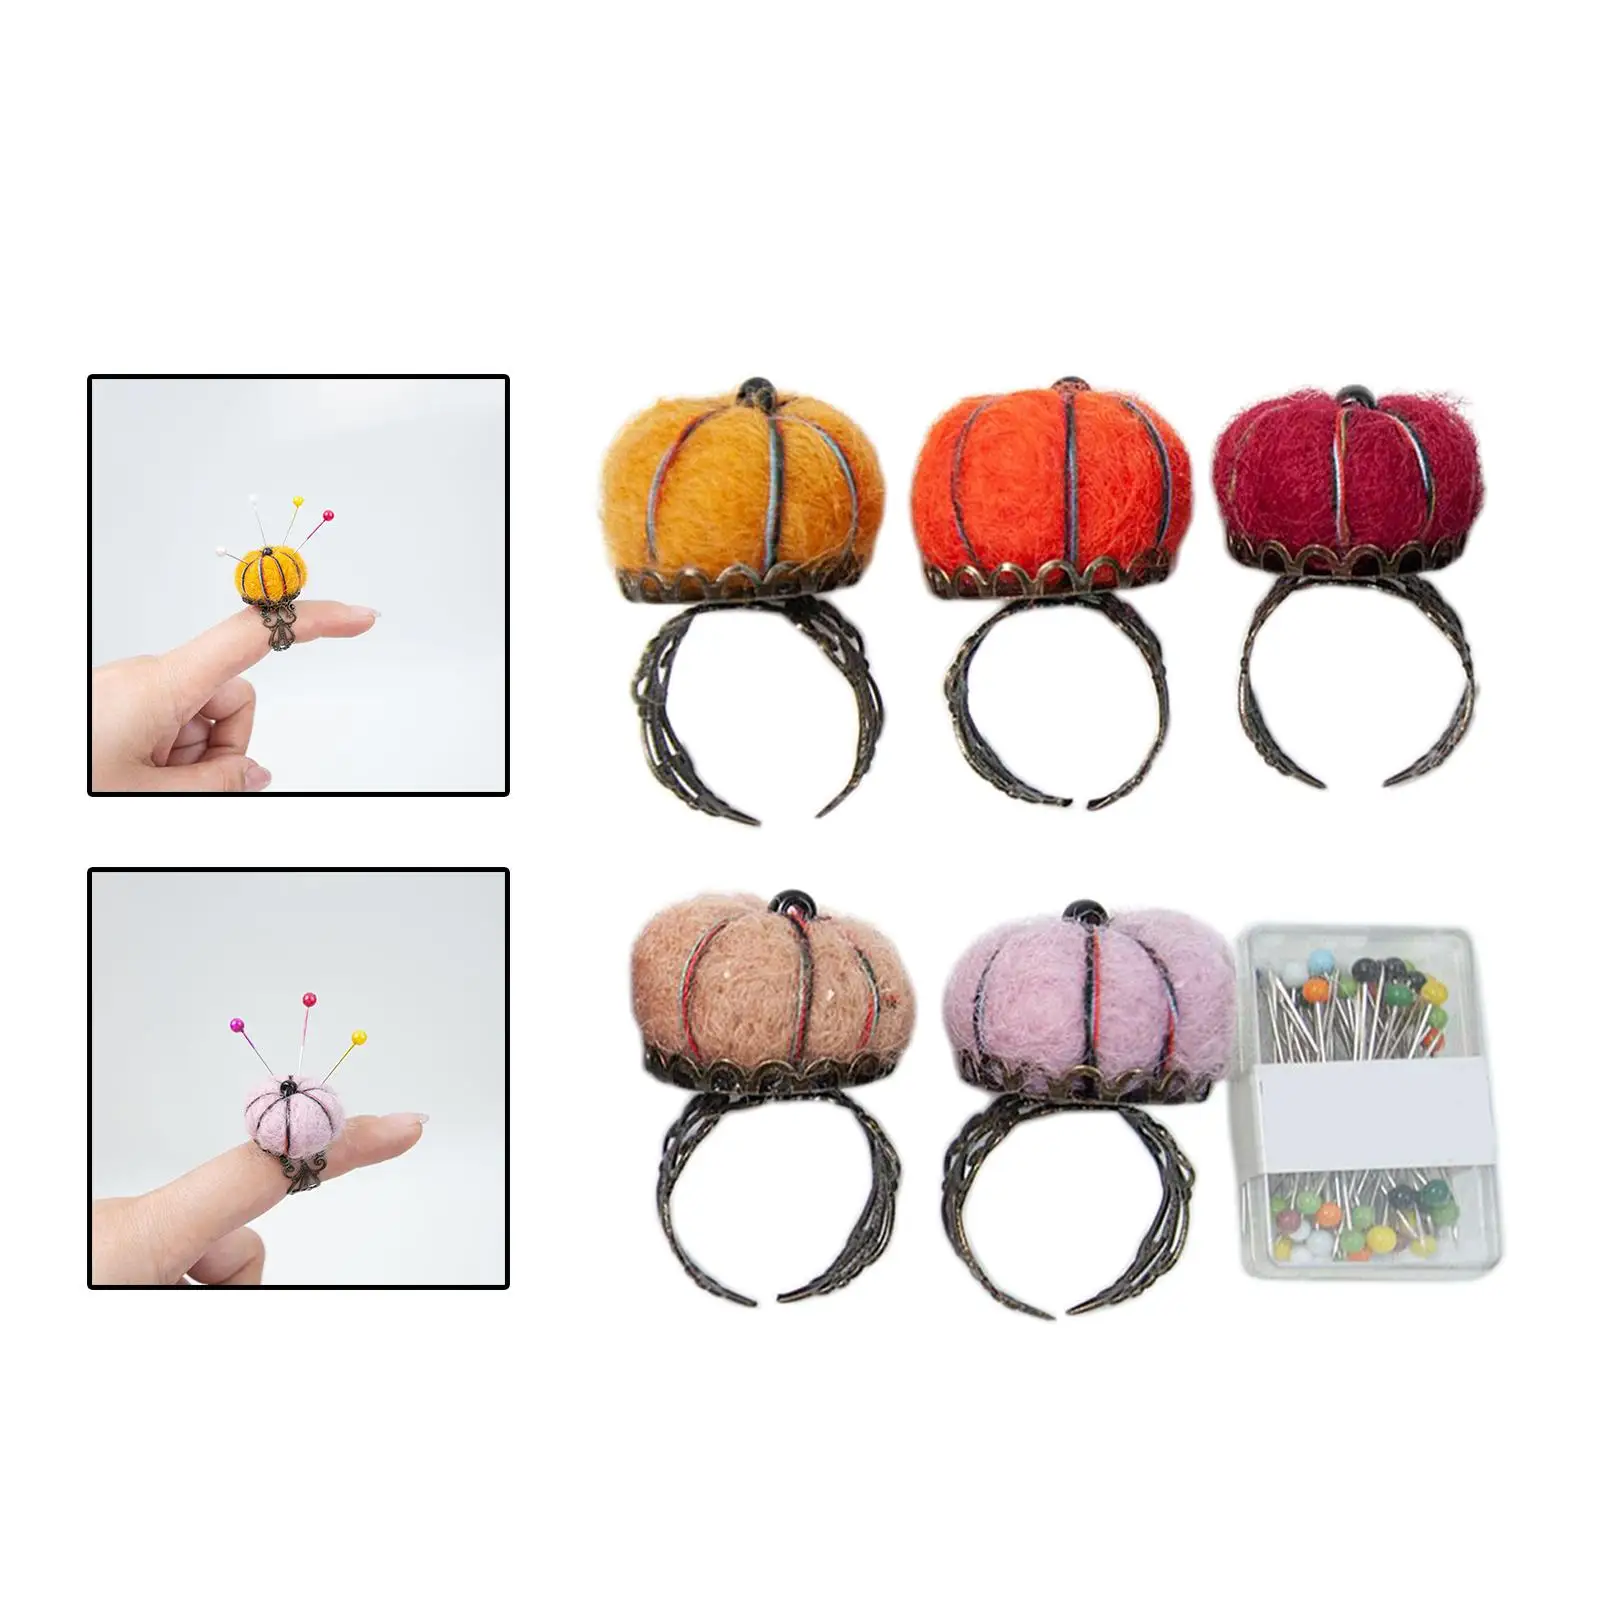 5Pcs Felt Pin Cushion Kit Sewing Supply DIY Crafts Handcraft Handmade Needlework Pumpkin Shaped for Sewing Quilting Accessories